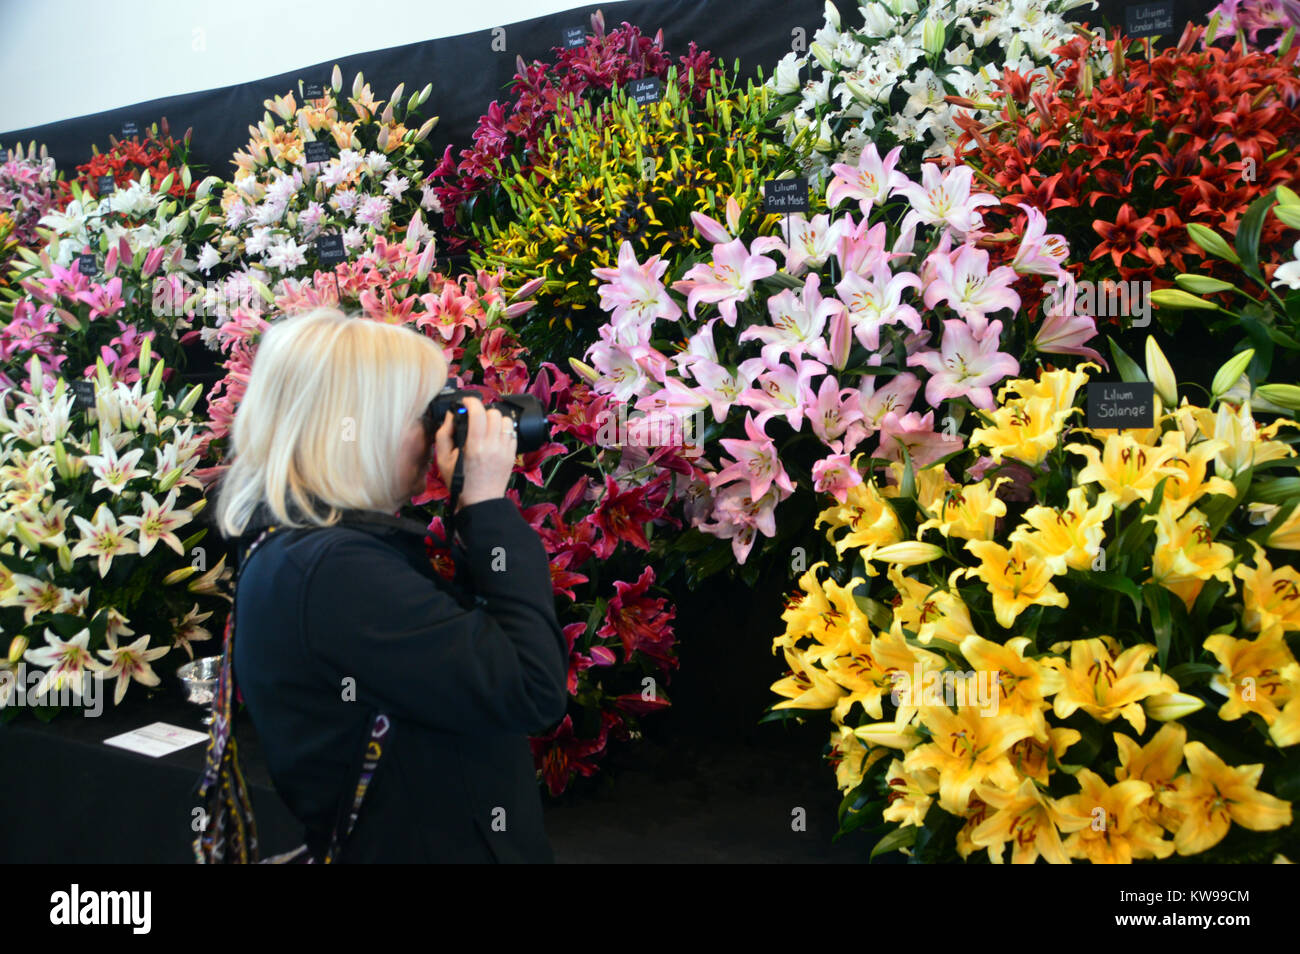 A Woman Photographer Taking Photos of Colourful Lilies on Display at the Harrogate Spring Show. Yorkshire, England, UK. Stock Photo